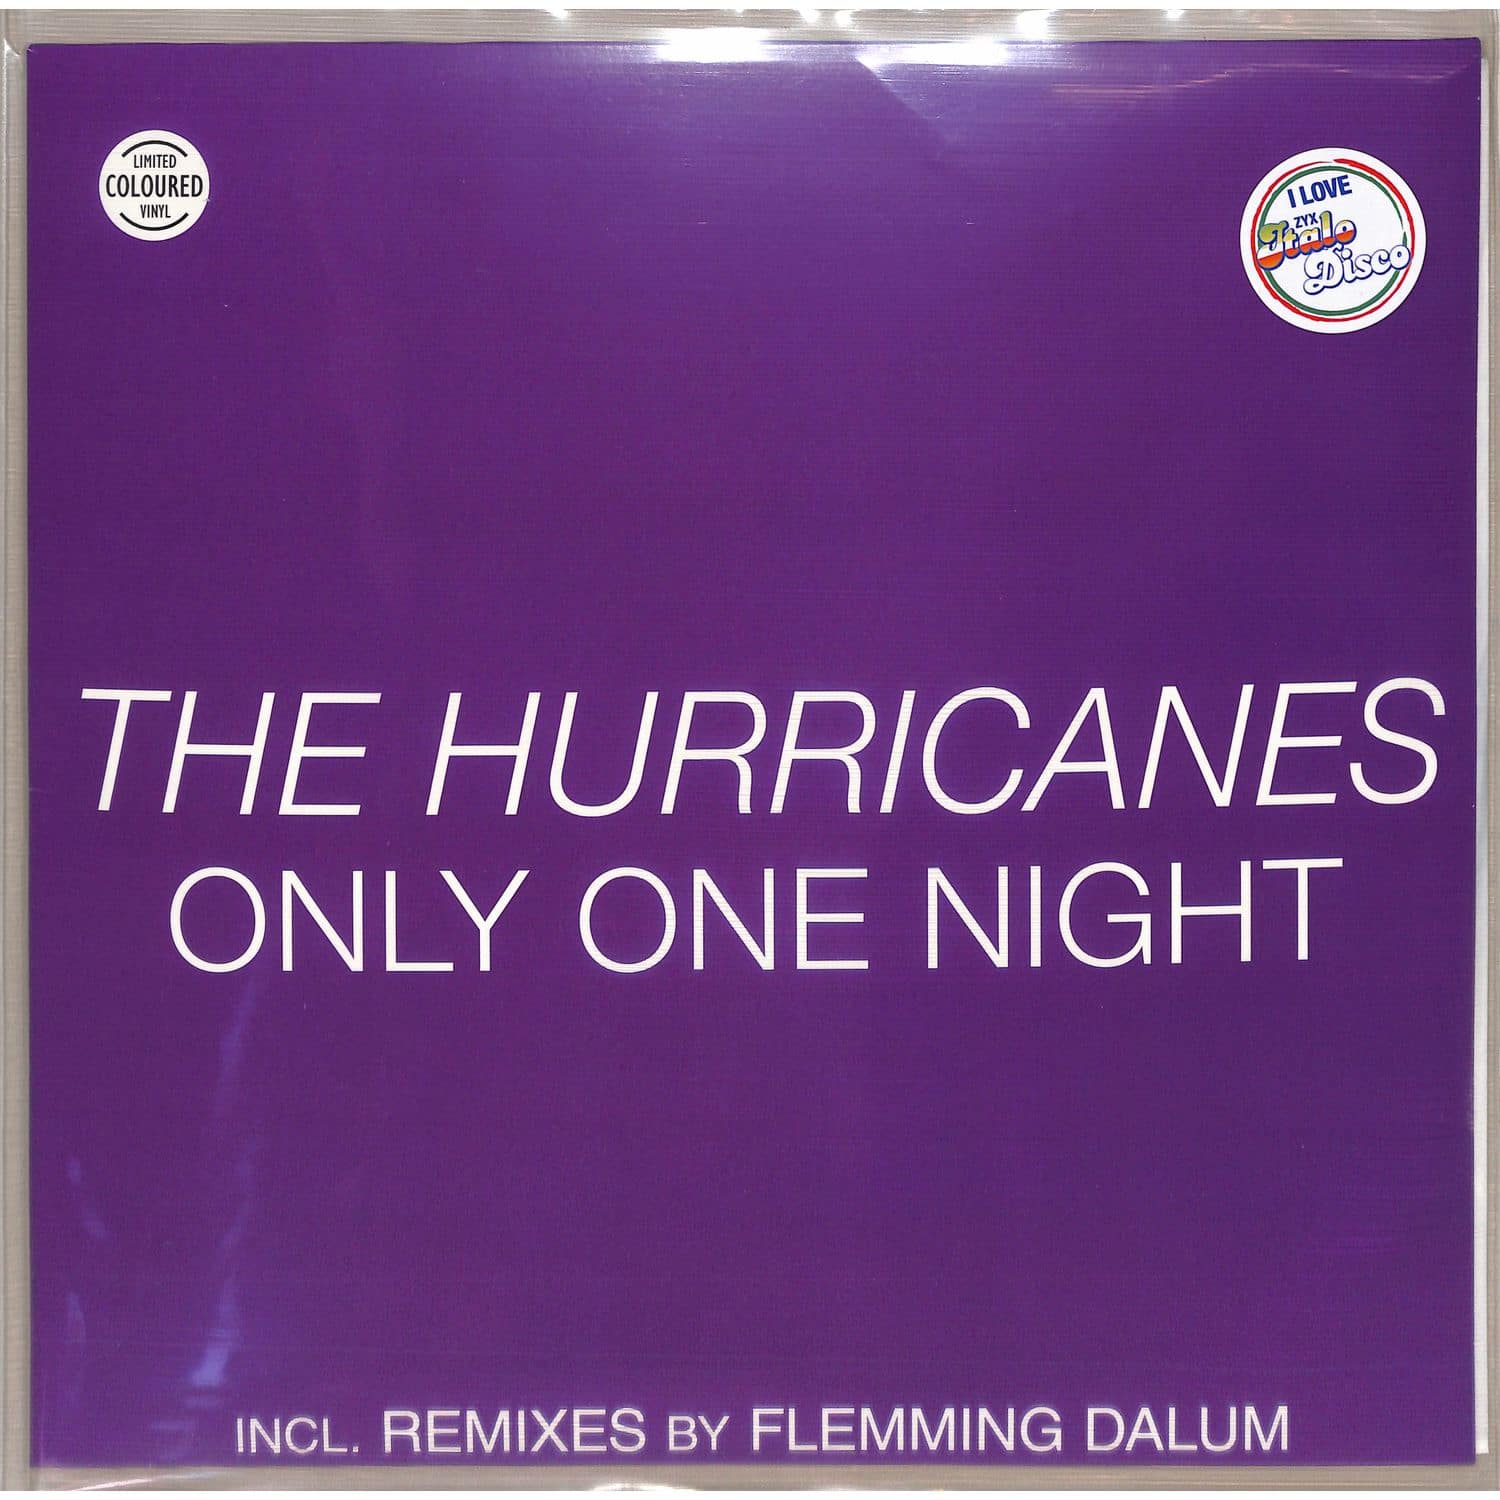 The Hurricanes - ONLY ONE NIGHT